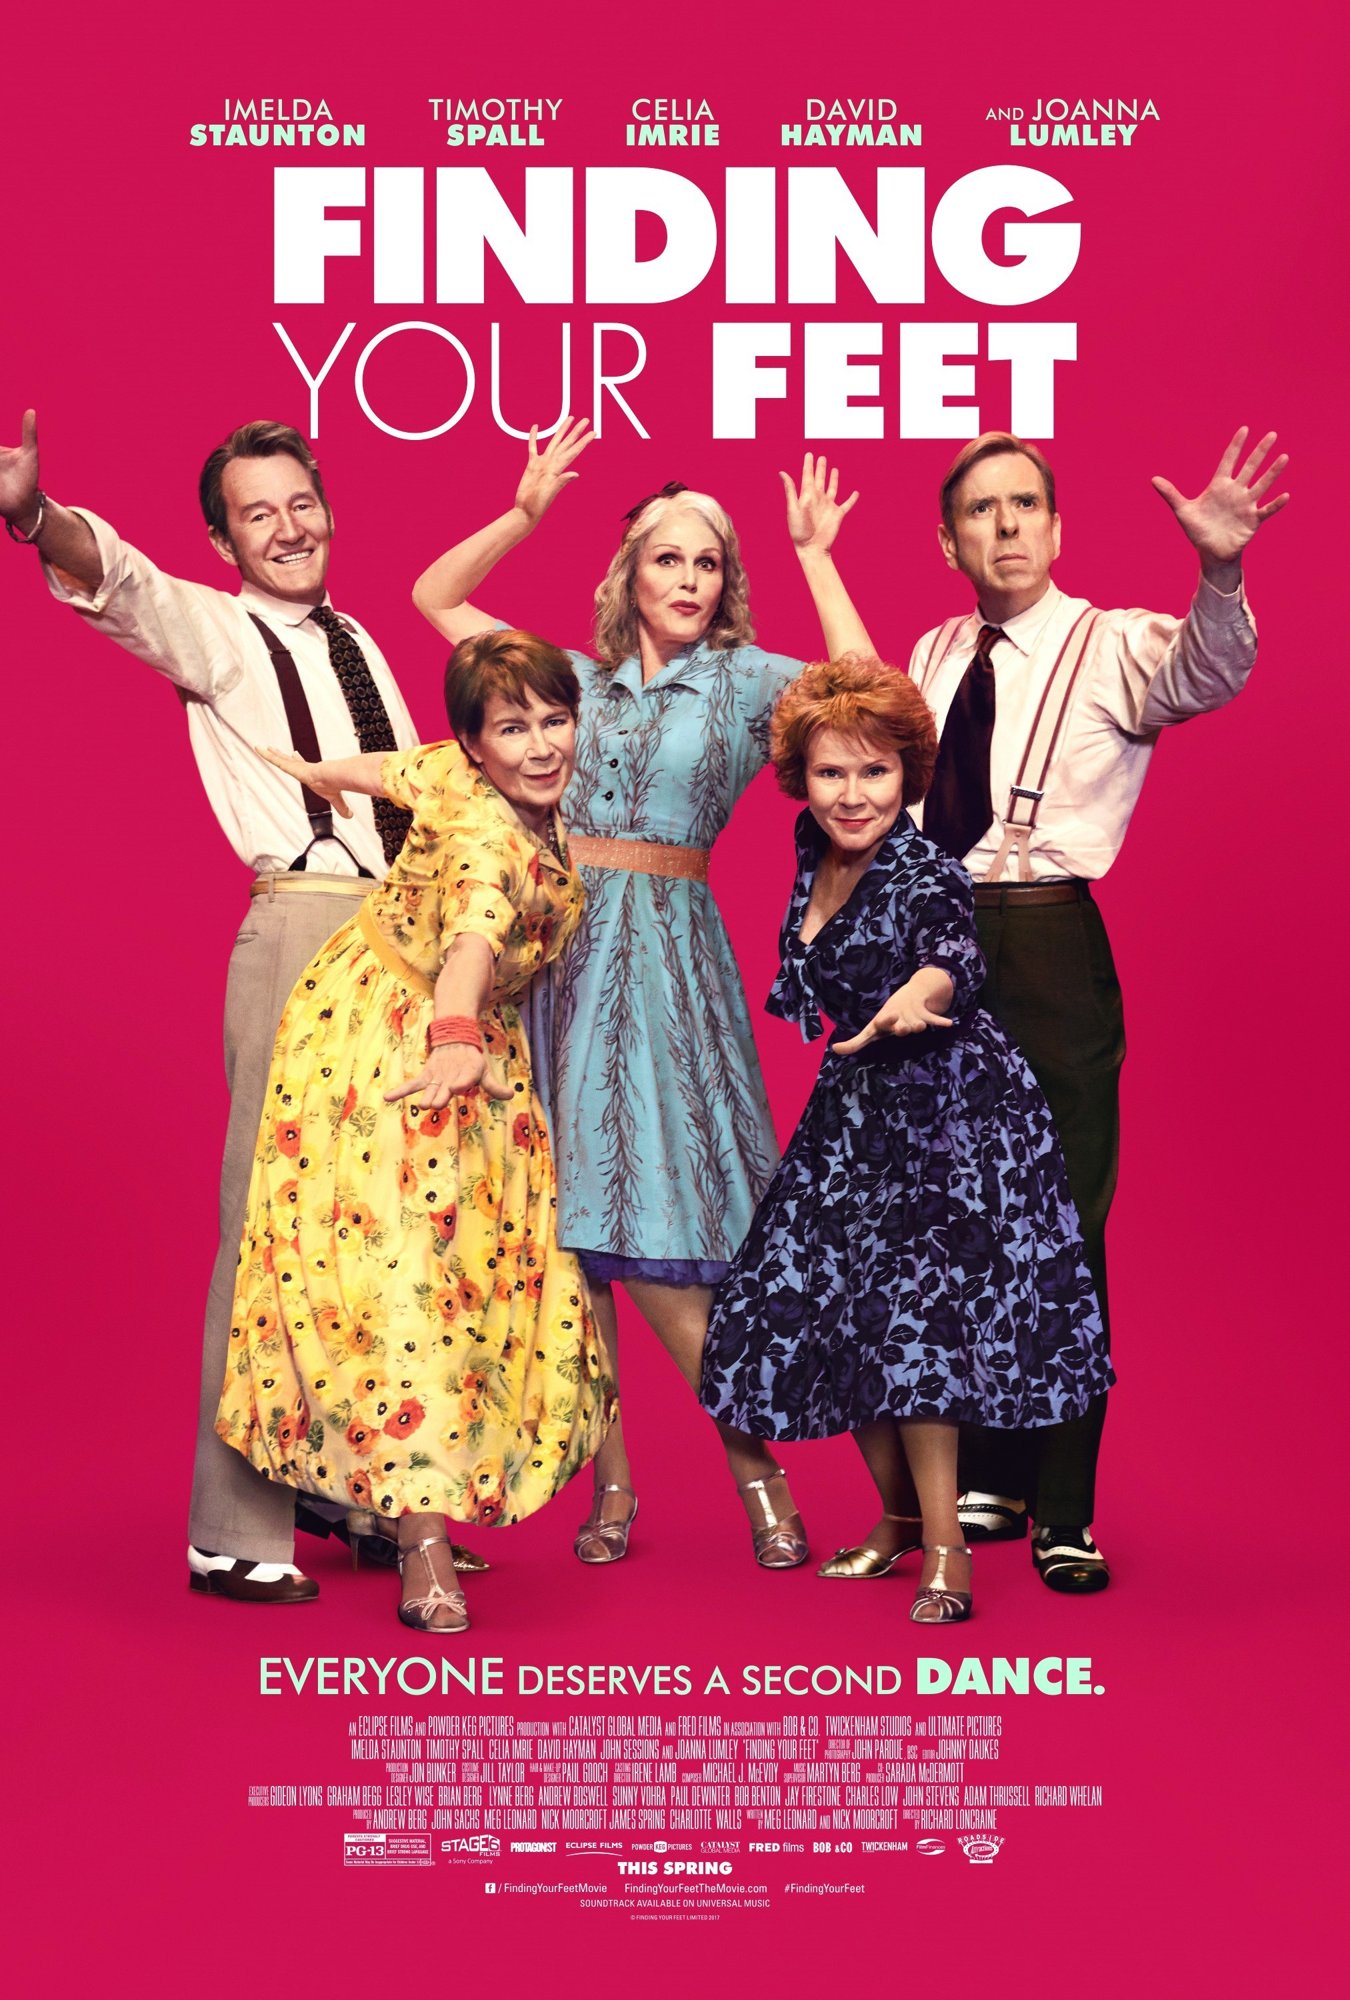 Poster of Roadside Attractions' Finding Your Feet (2018)